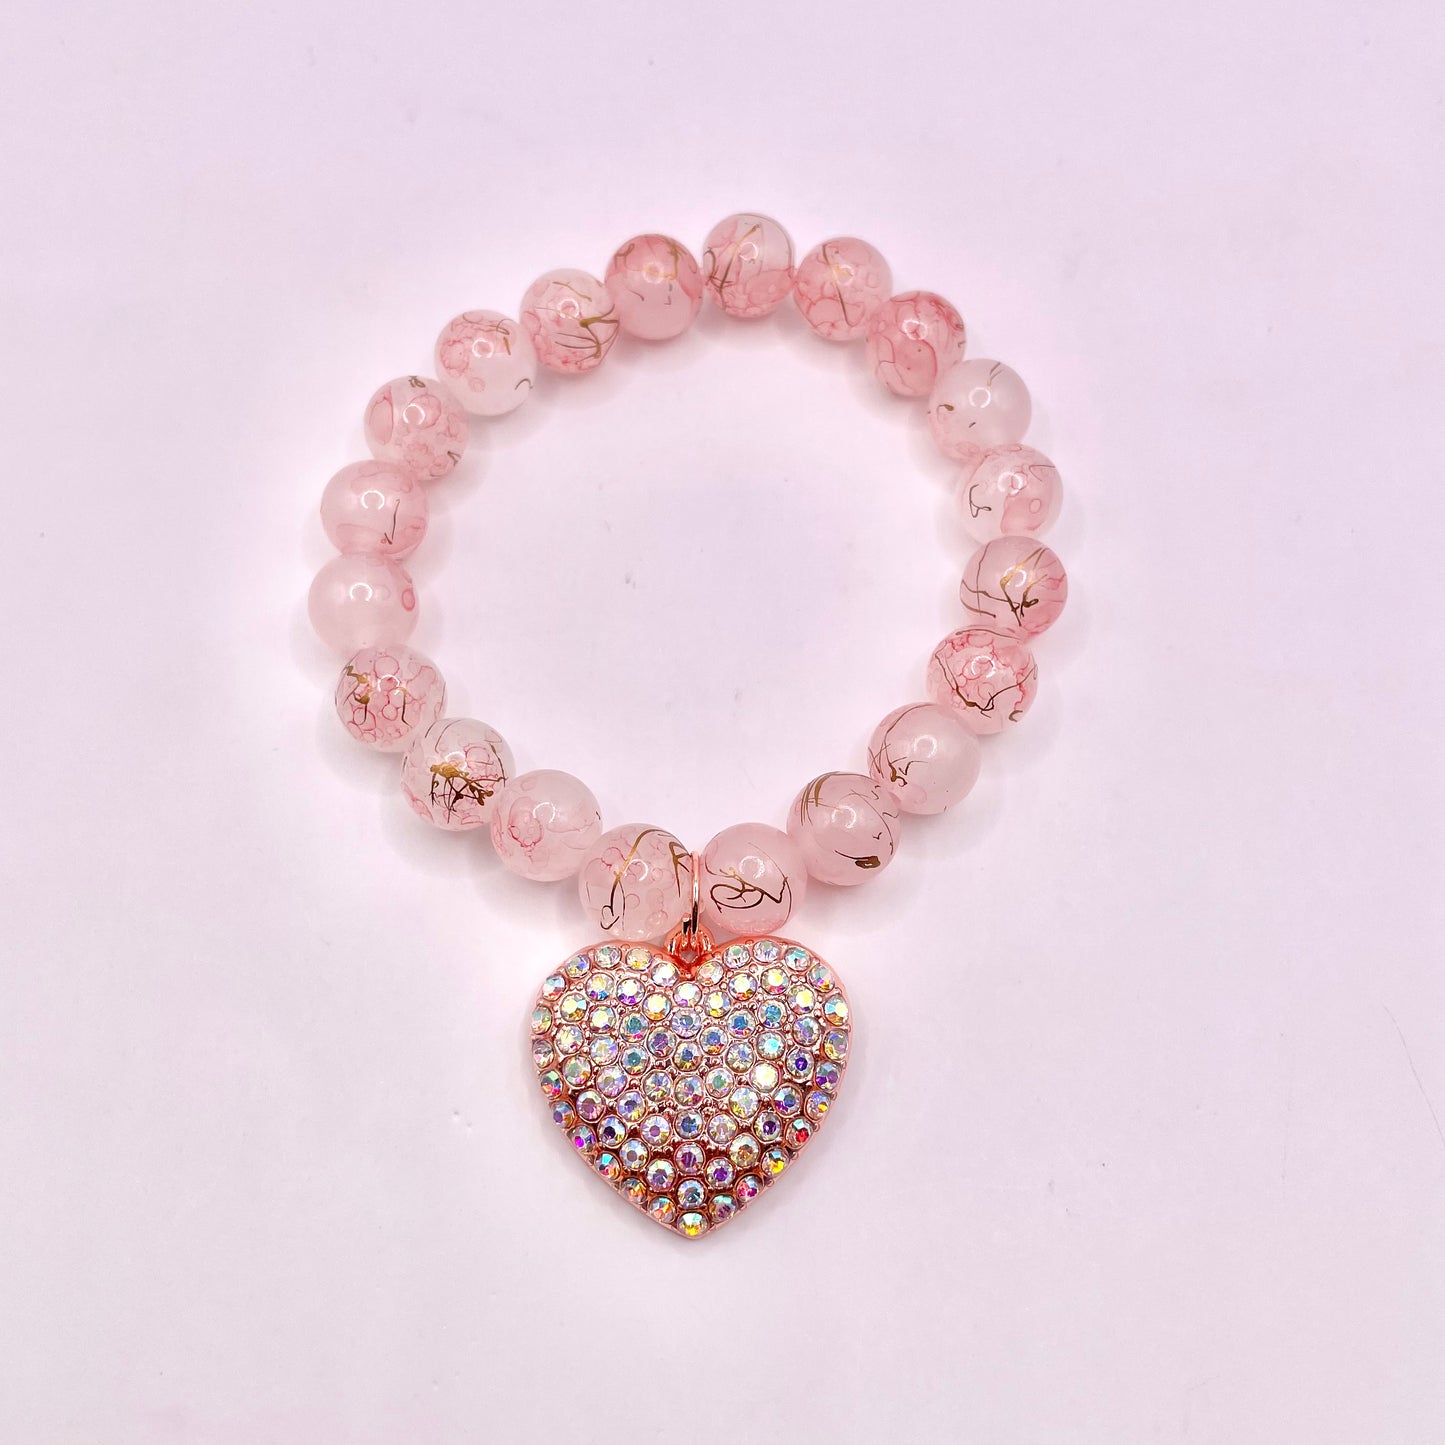 Pink Gold Speck Bracelets with Heart Charm